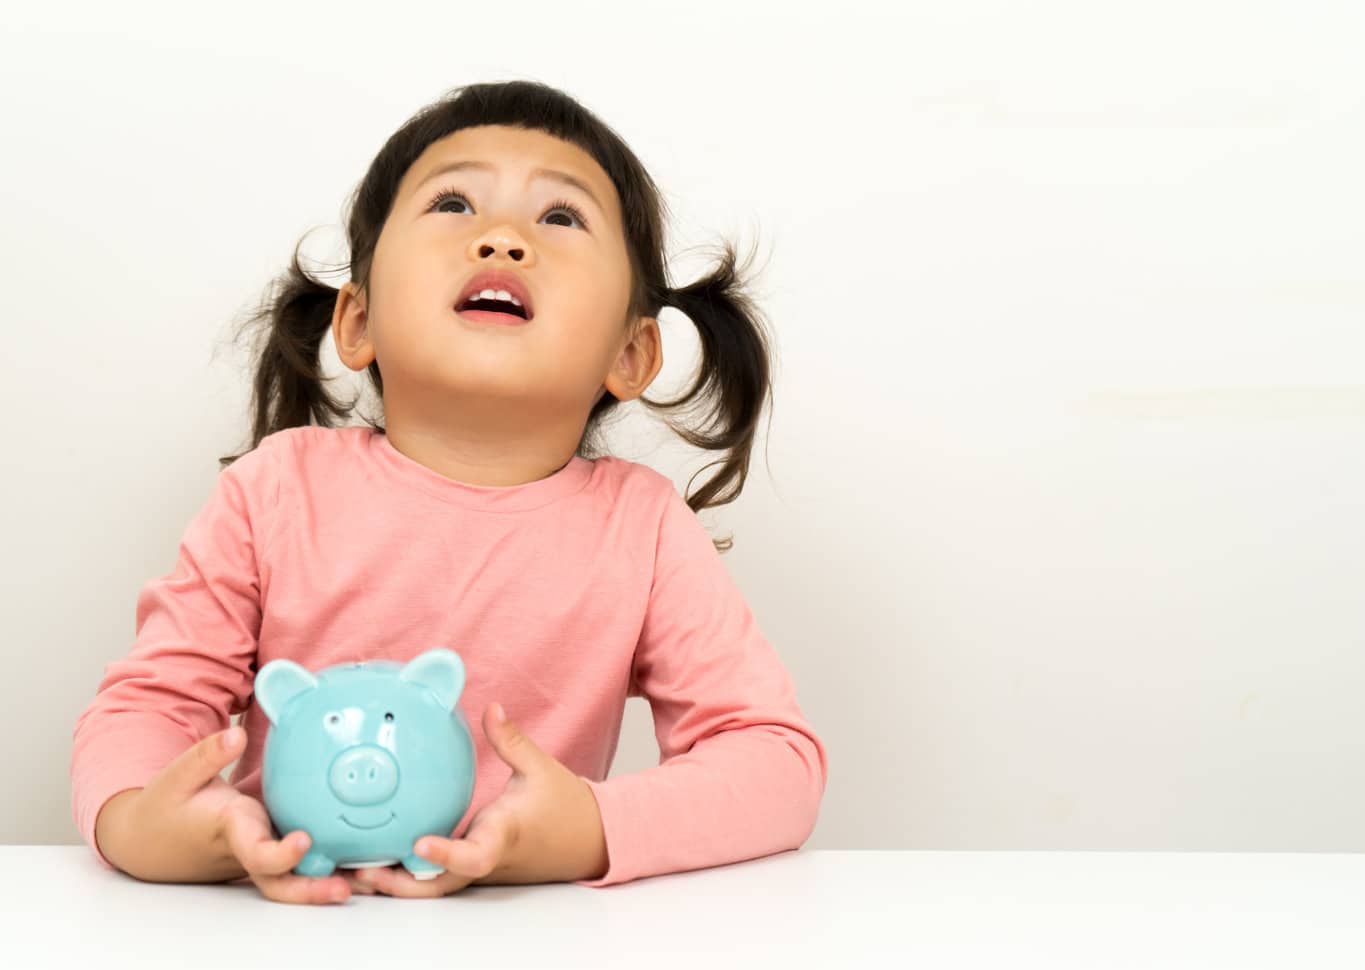 Teach your children about money from a young age